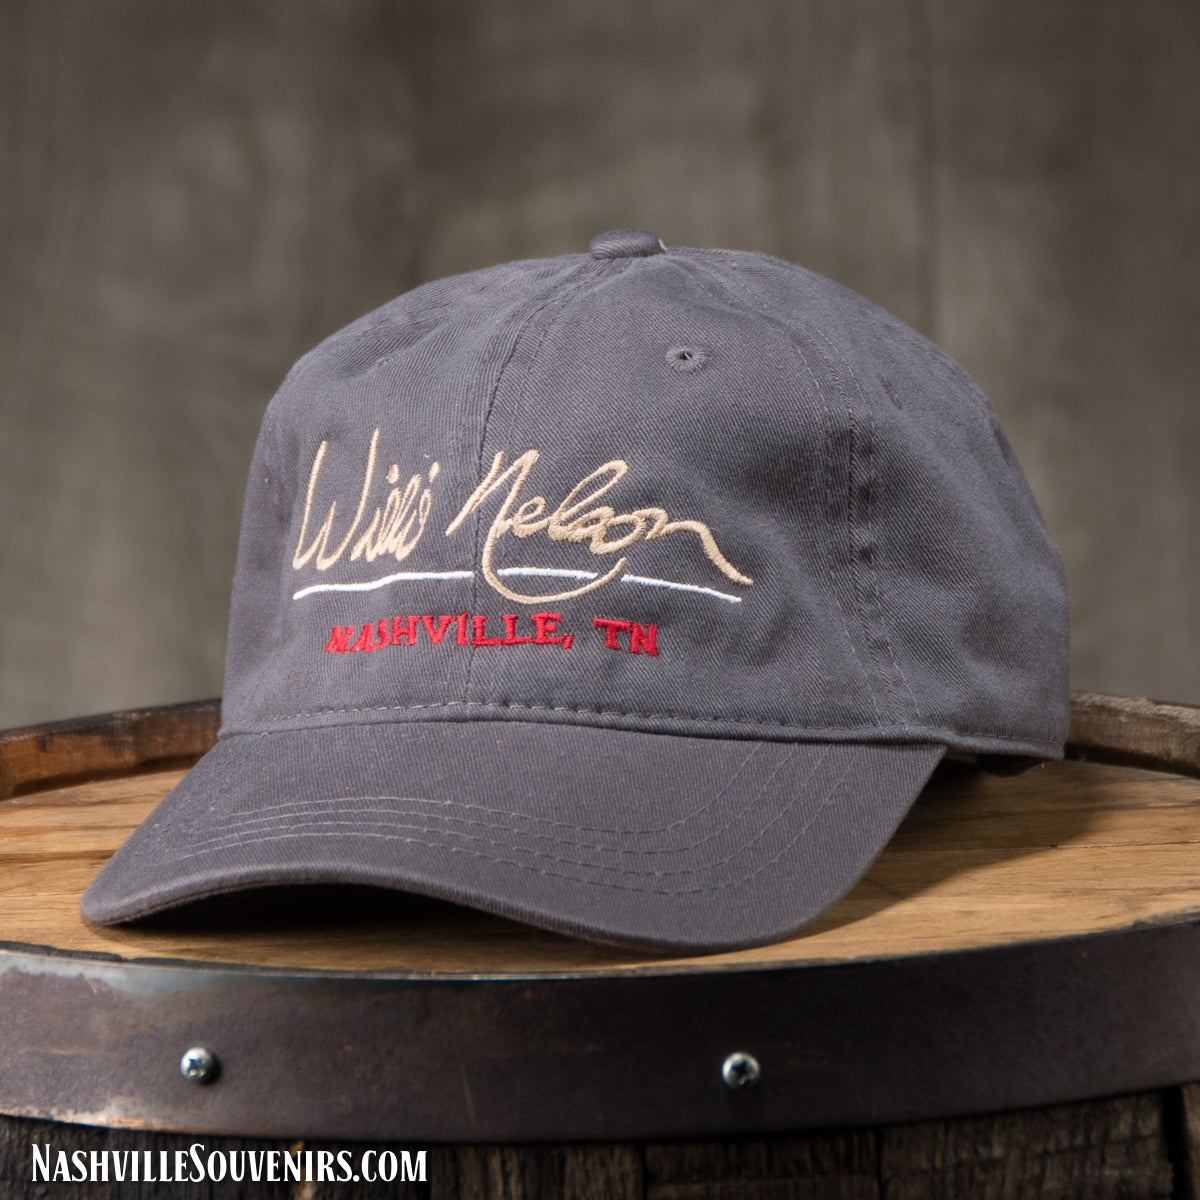 Charcoal Embroidered Willie Nelson Nashville Cap